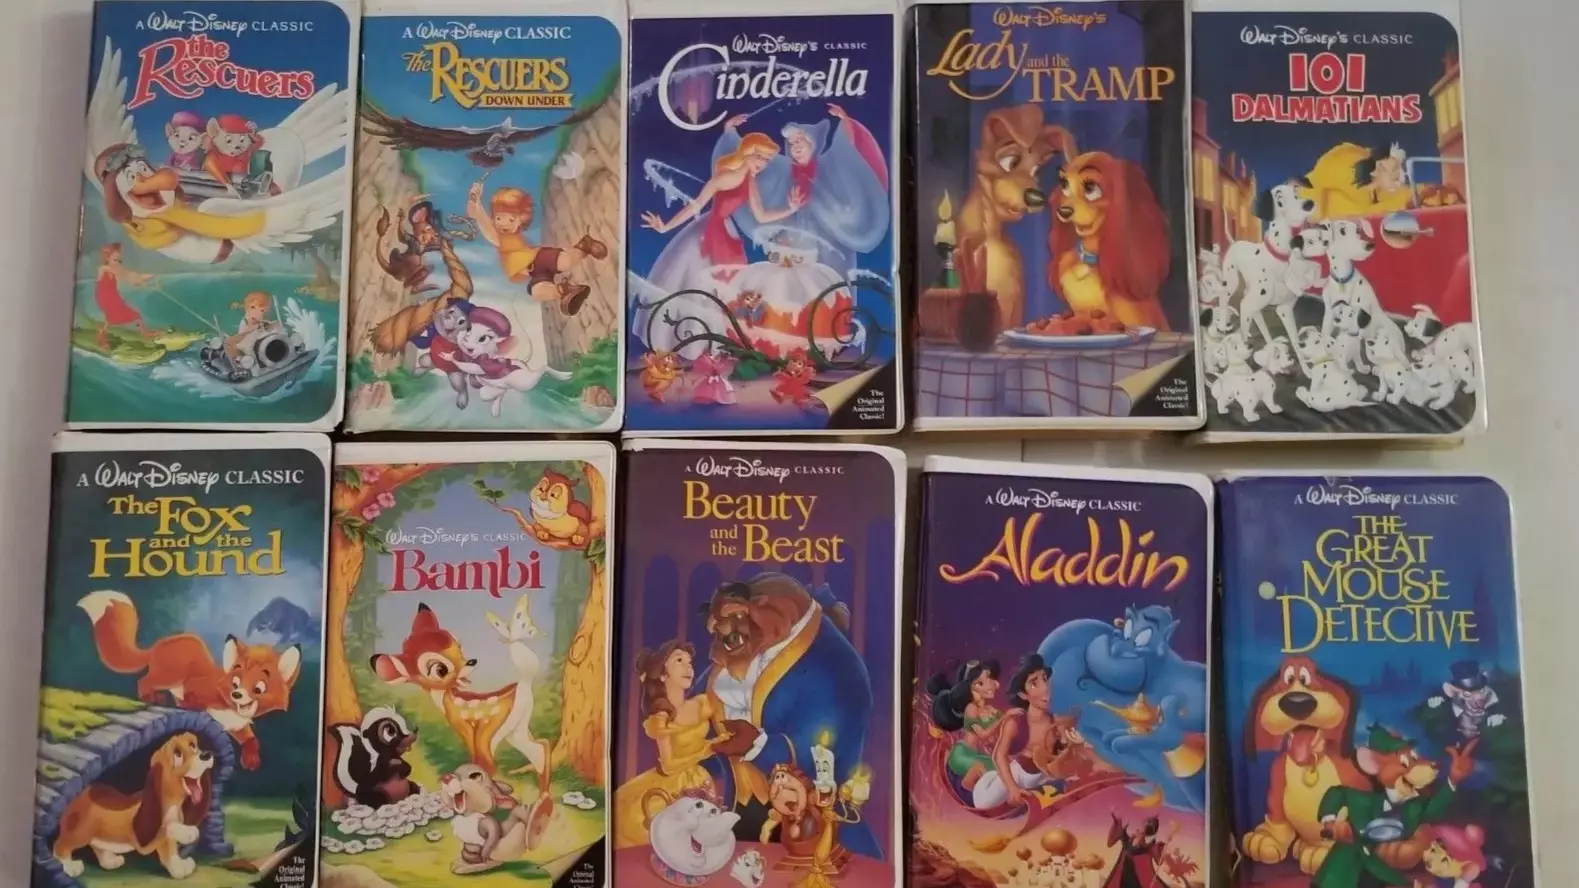 Your Old Disney VHS Tapes Could Be Worth Thousands On eBay